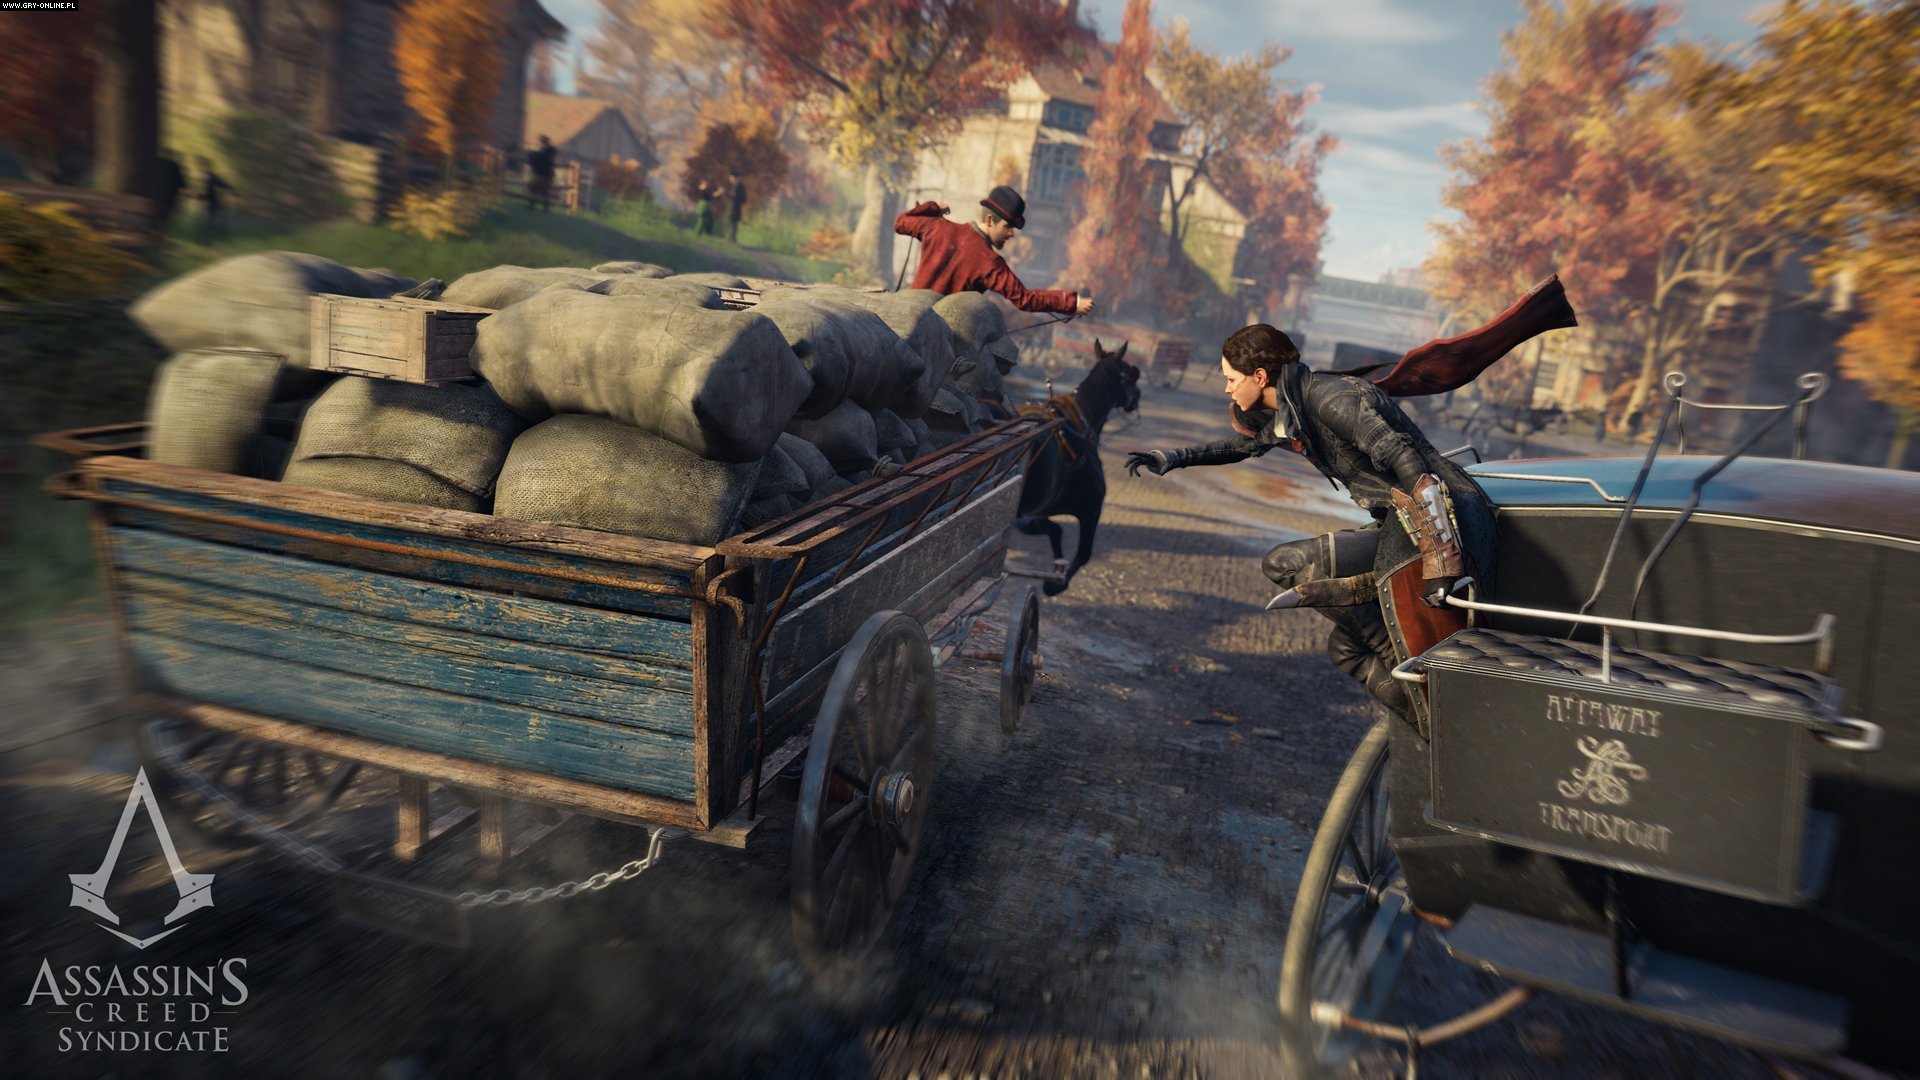 Assassin's Creed Syndicate gameplay